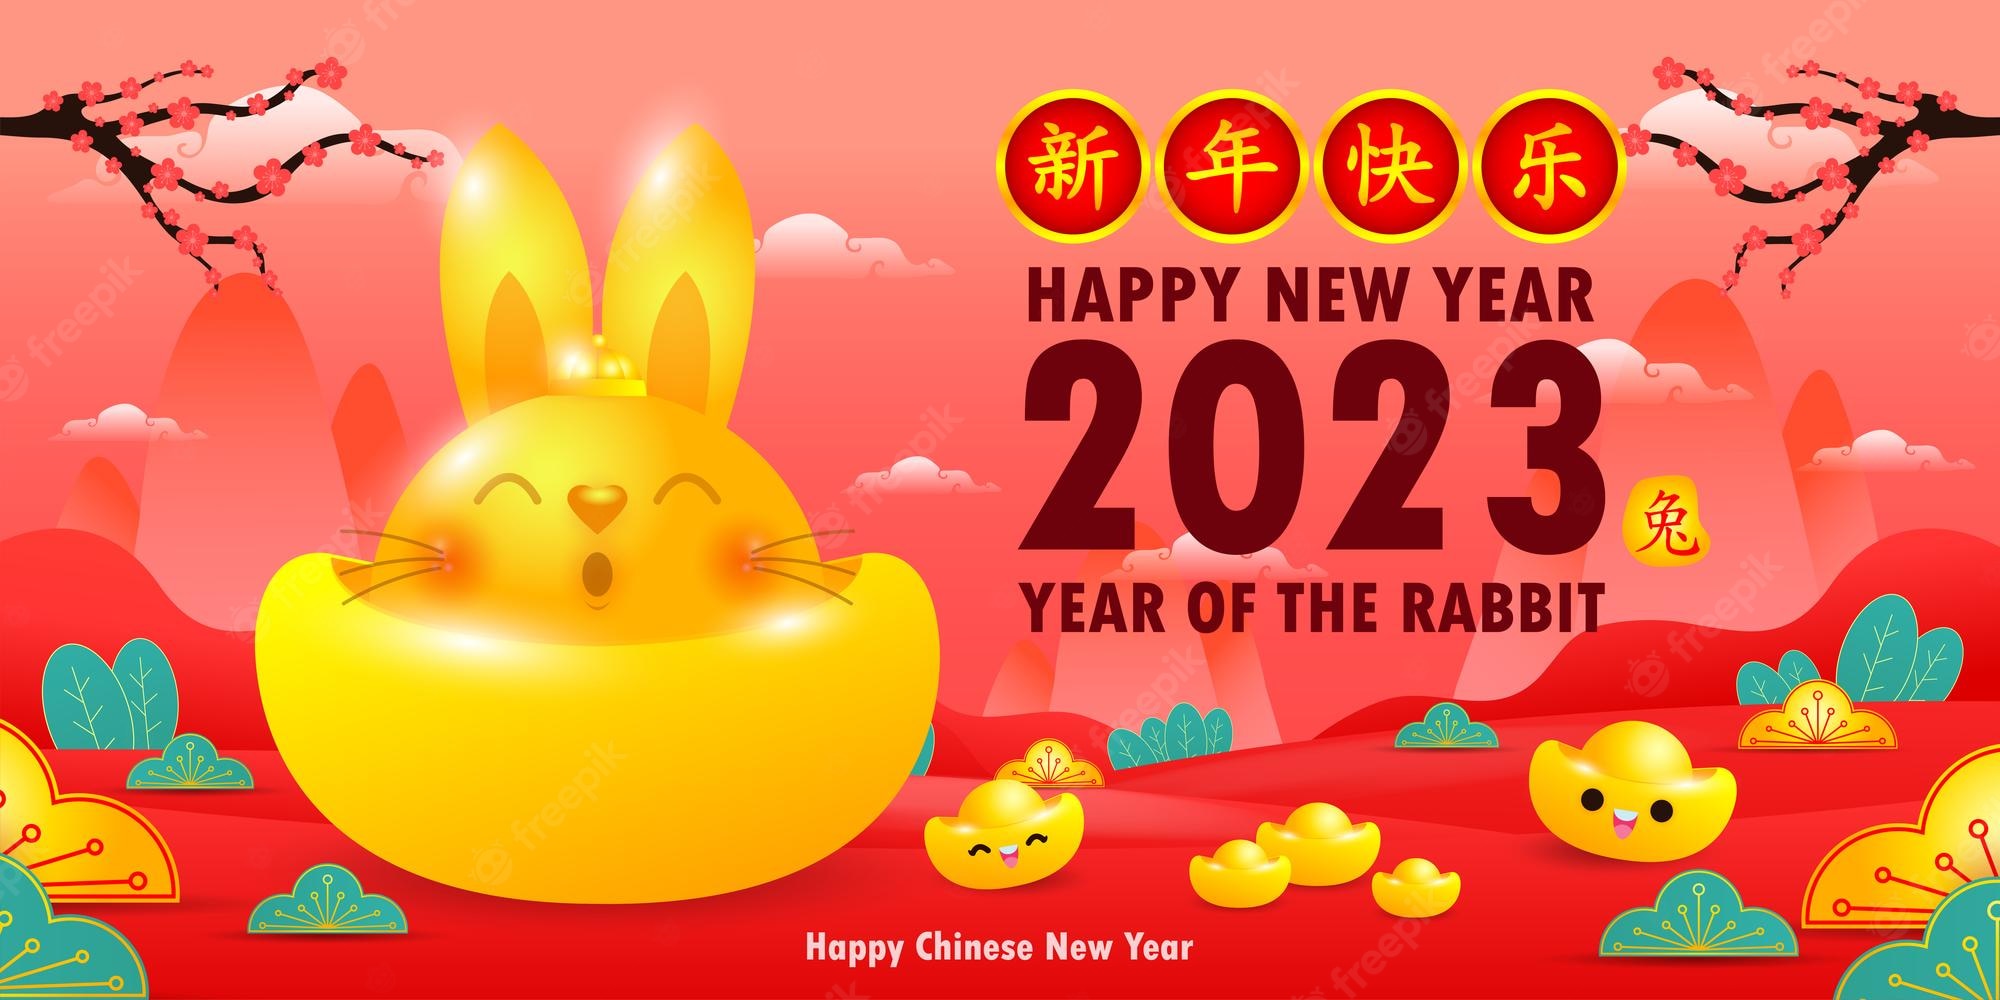 Lunar New Year 2023 Wallpapers - Wallpaper Cave